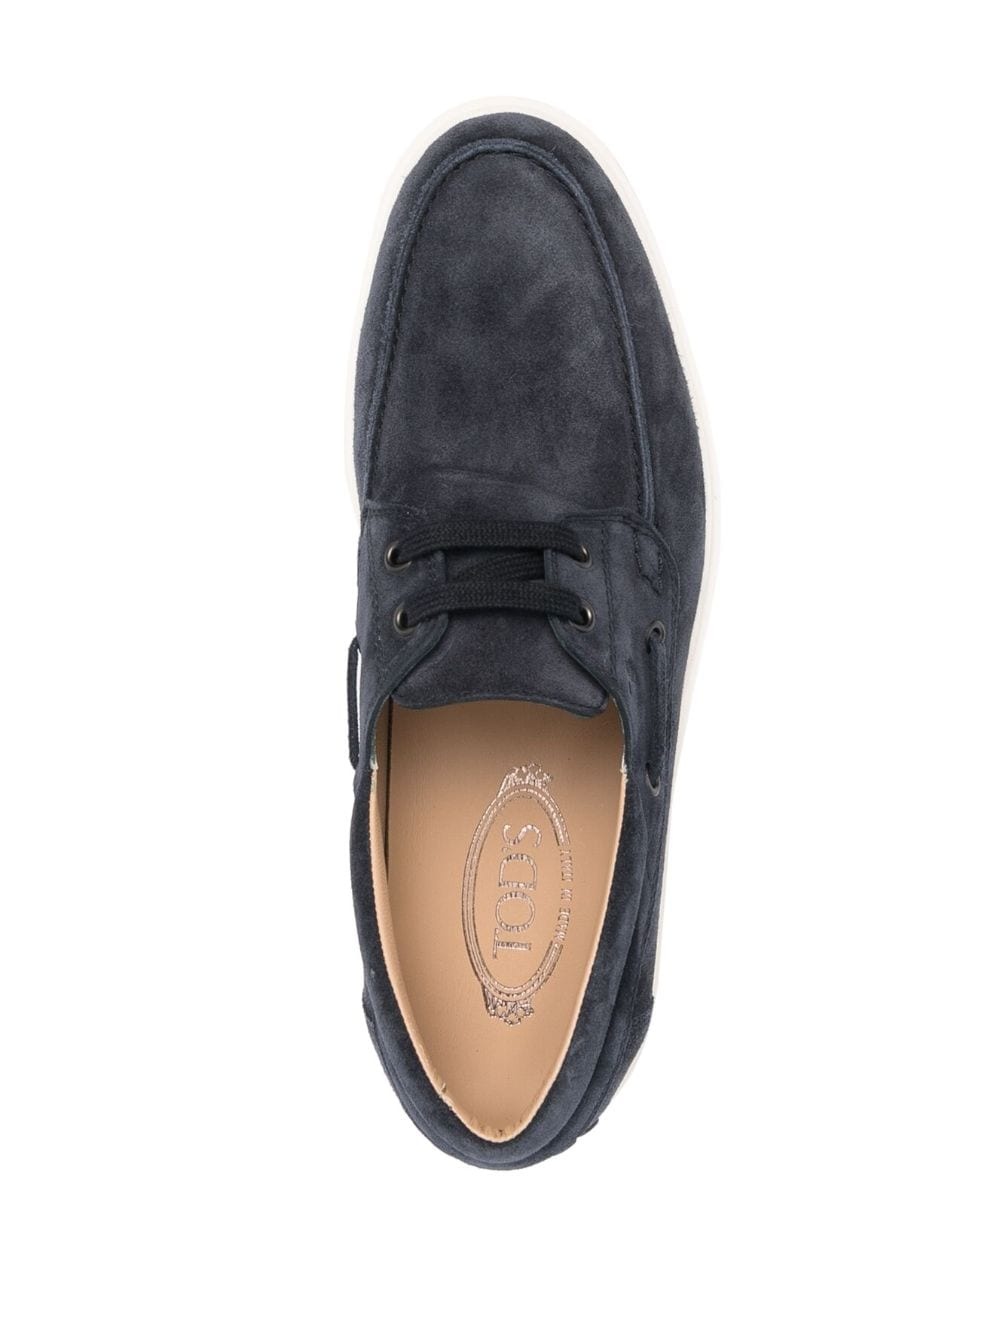 suede boat shoes - 4